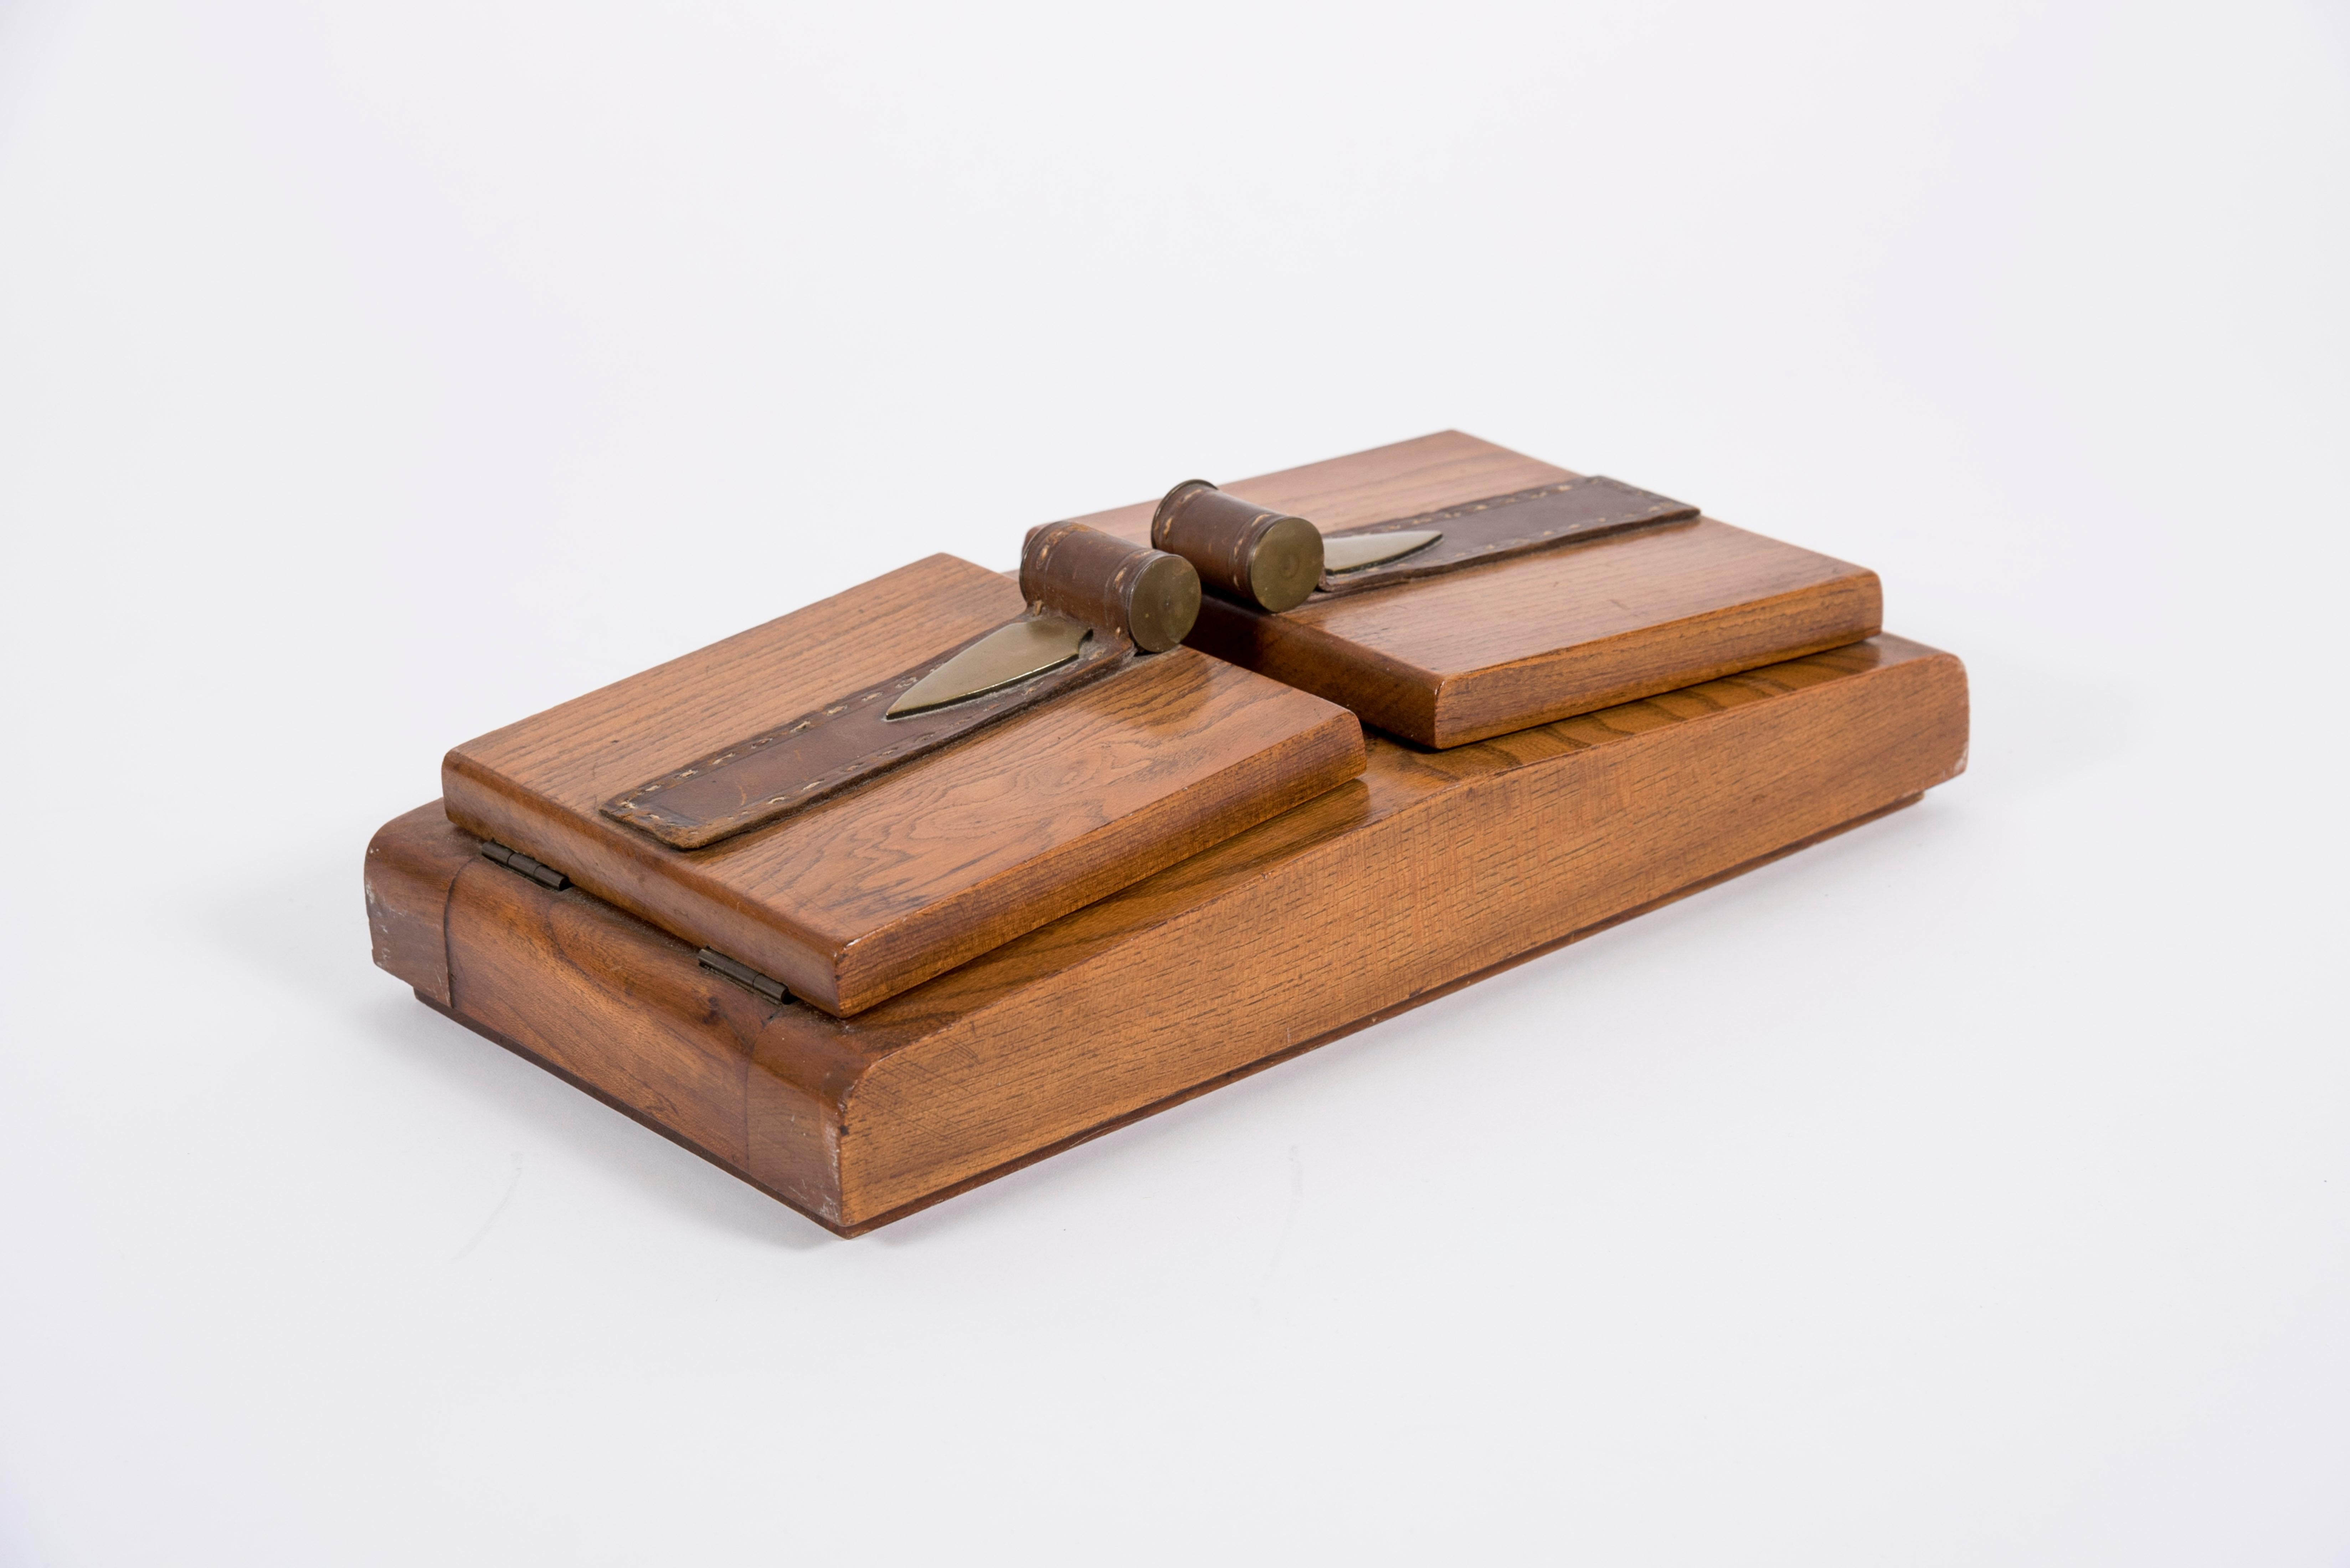 1950's wood and stitched leather box by Jacques Adnet
France
Very rare piece in this dimension.